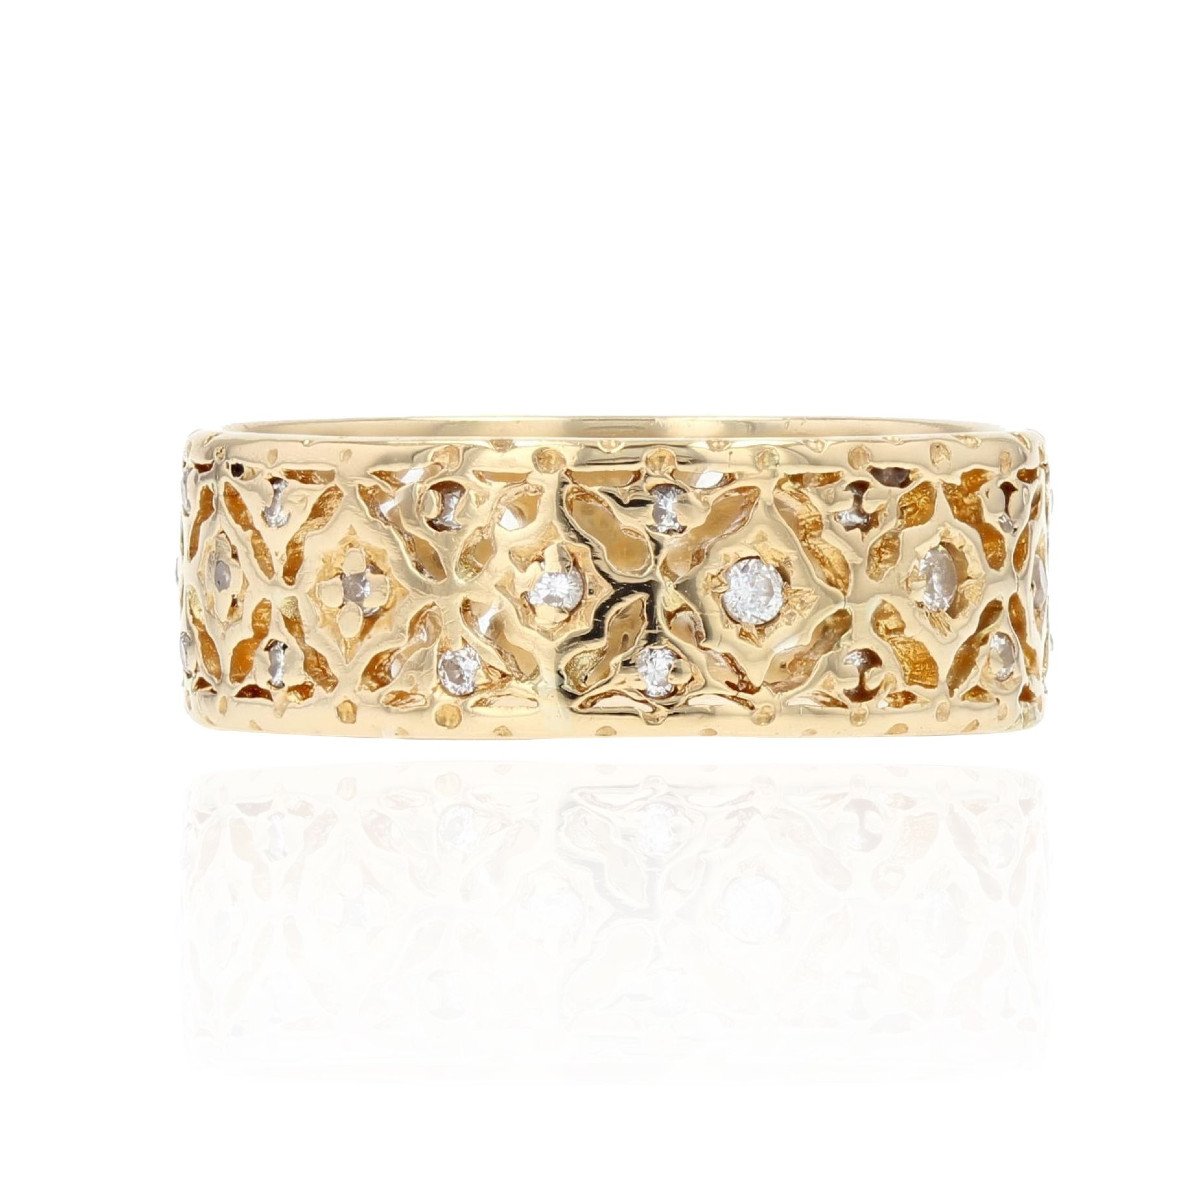 Old Ring In Gold And Diamonds